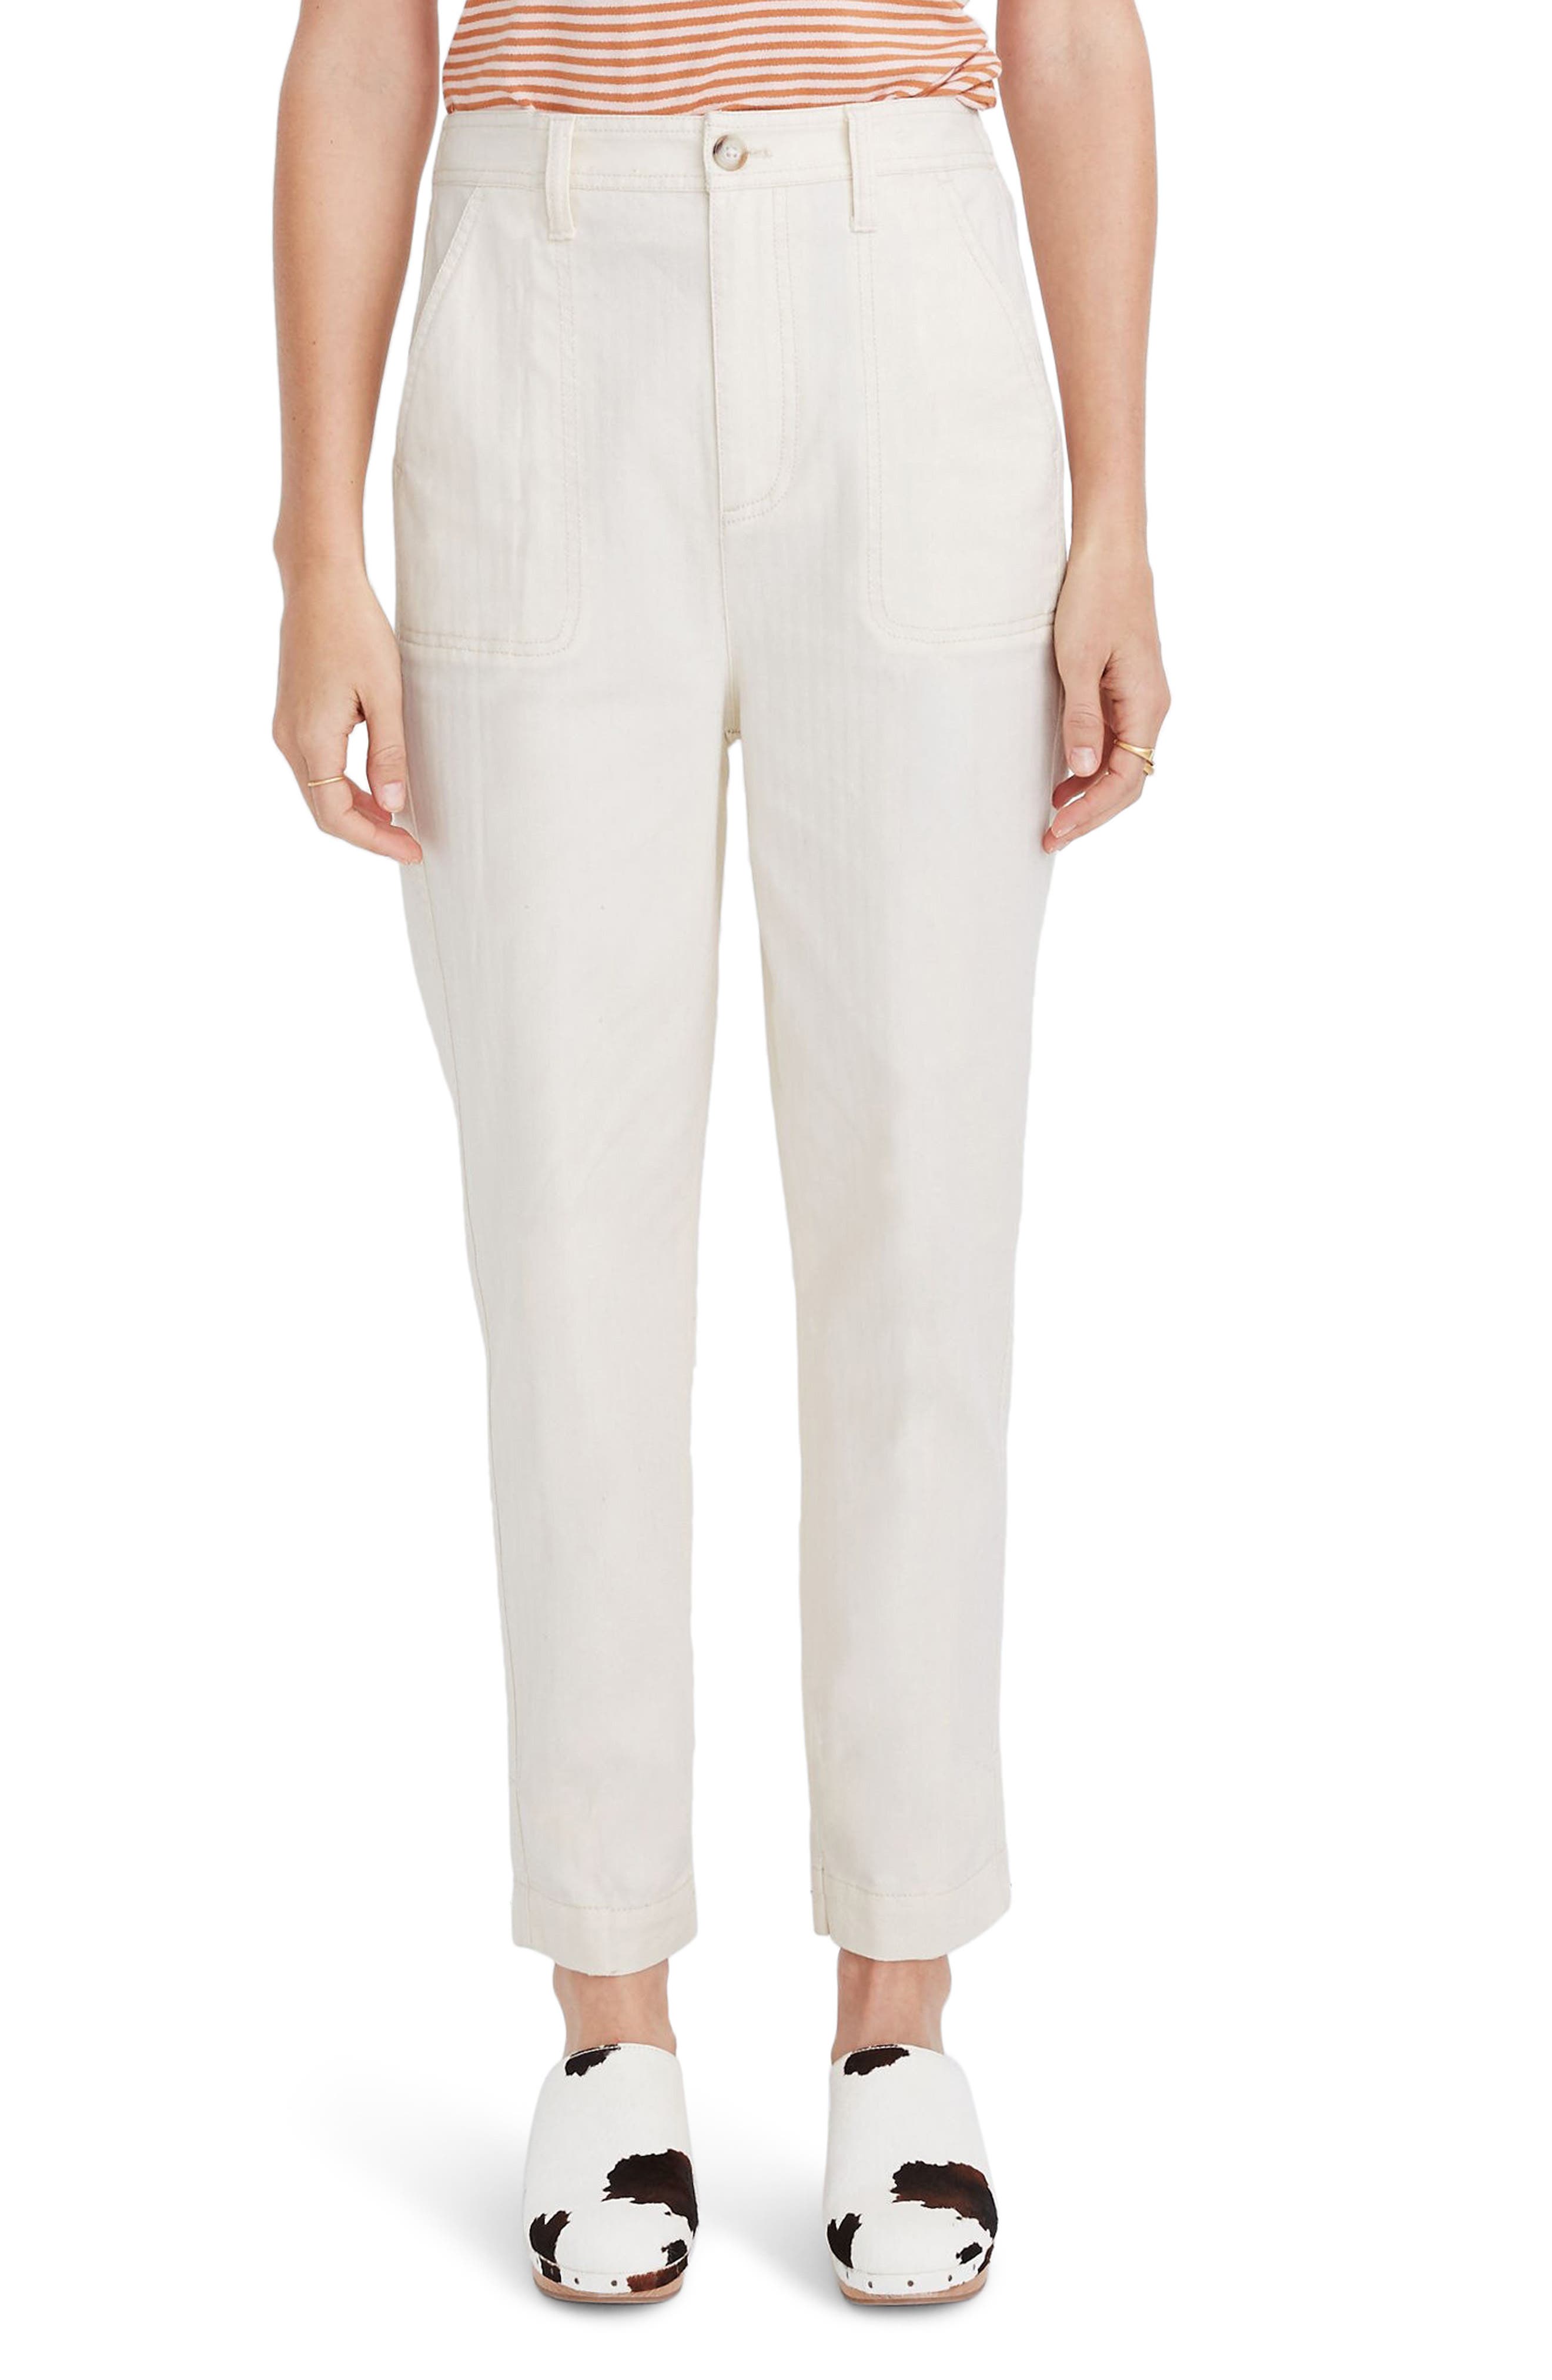 nordstrom madewell pants